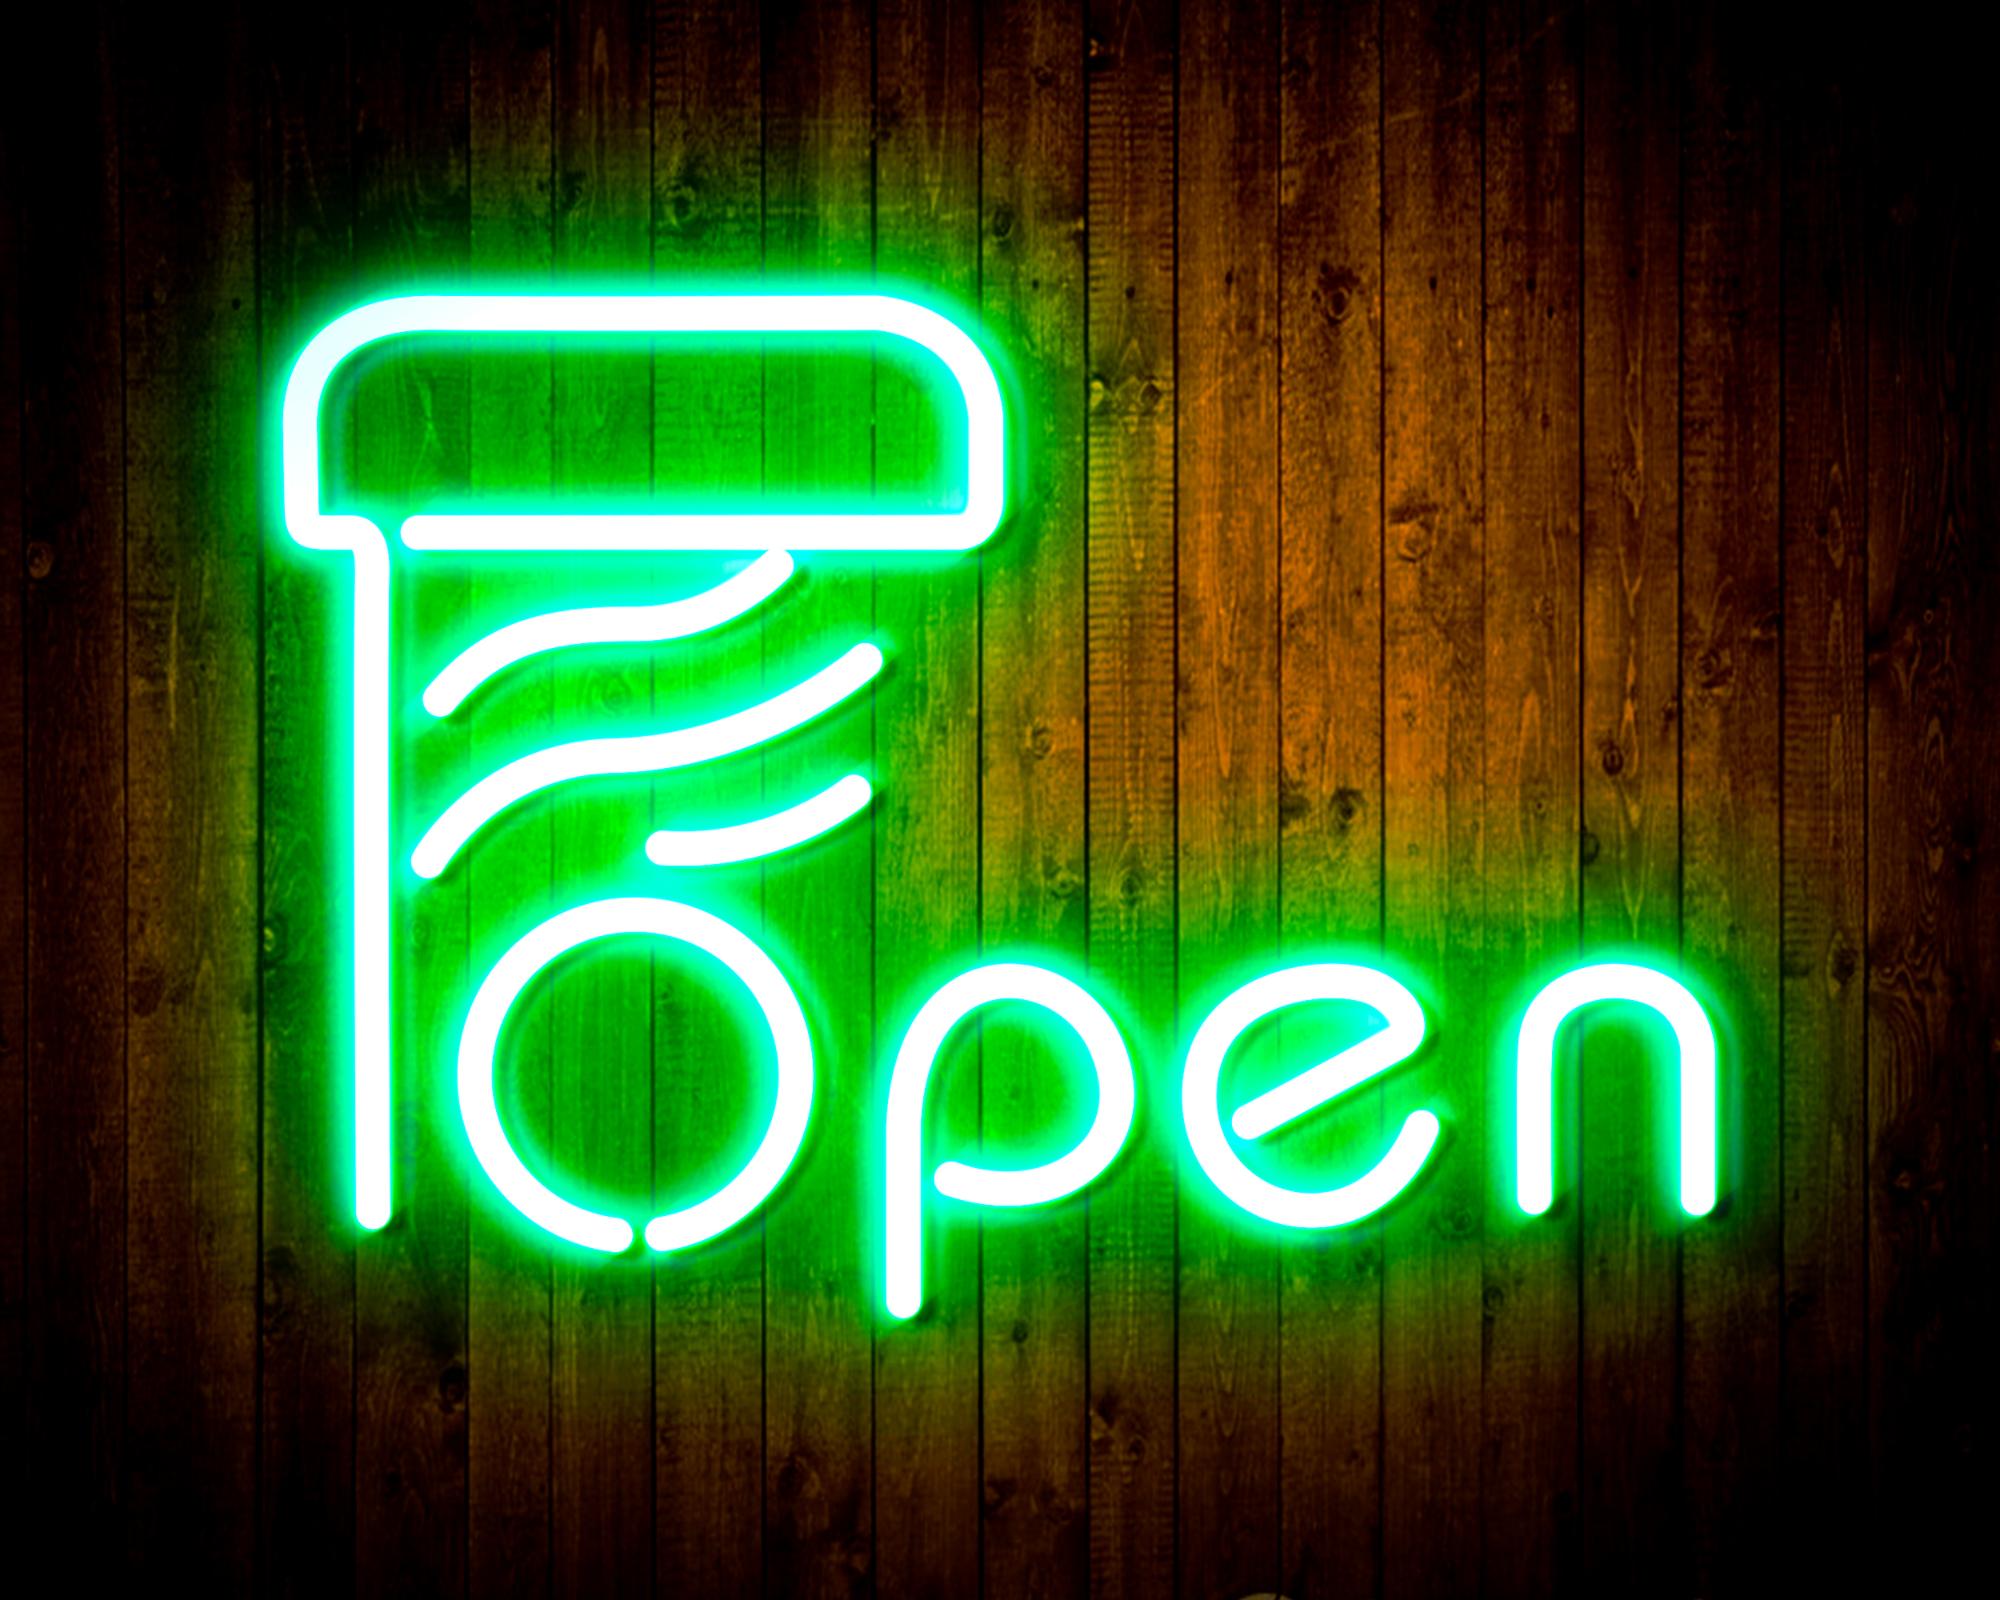 Open with Barber Pole LED Neon Sign Wall Light